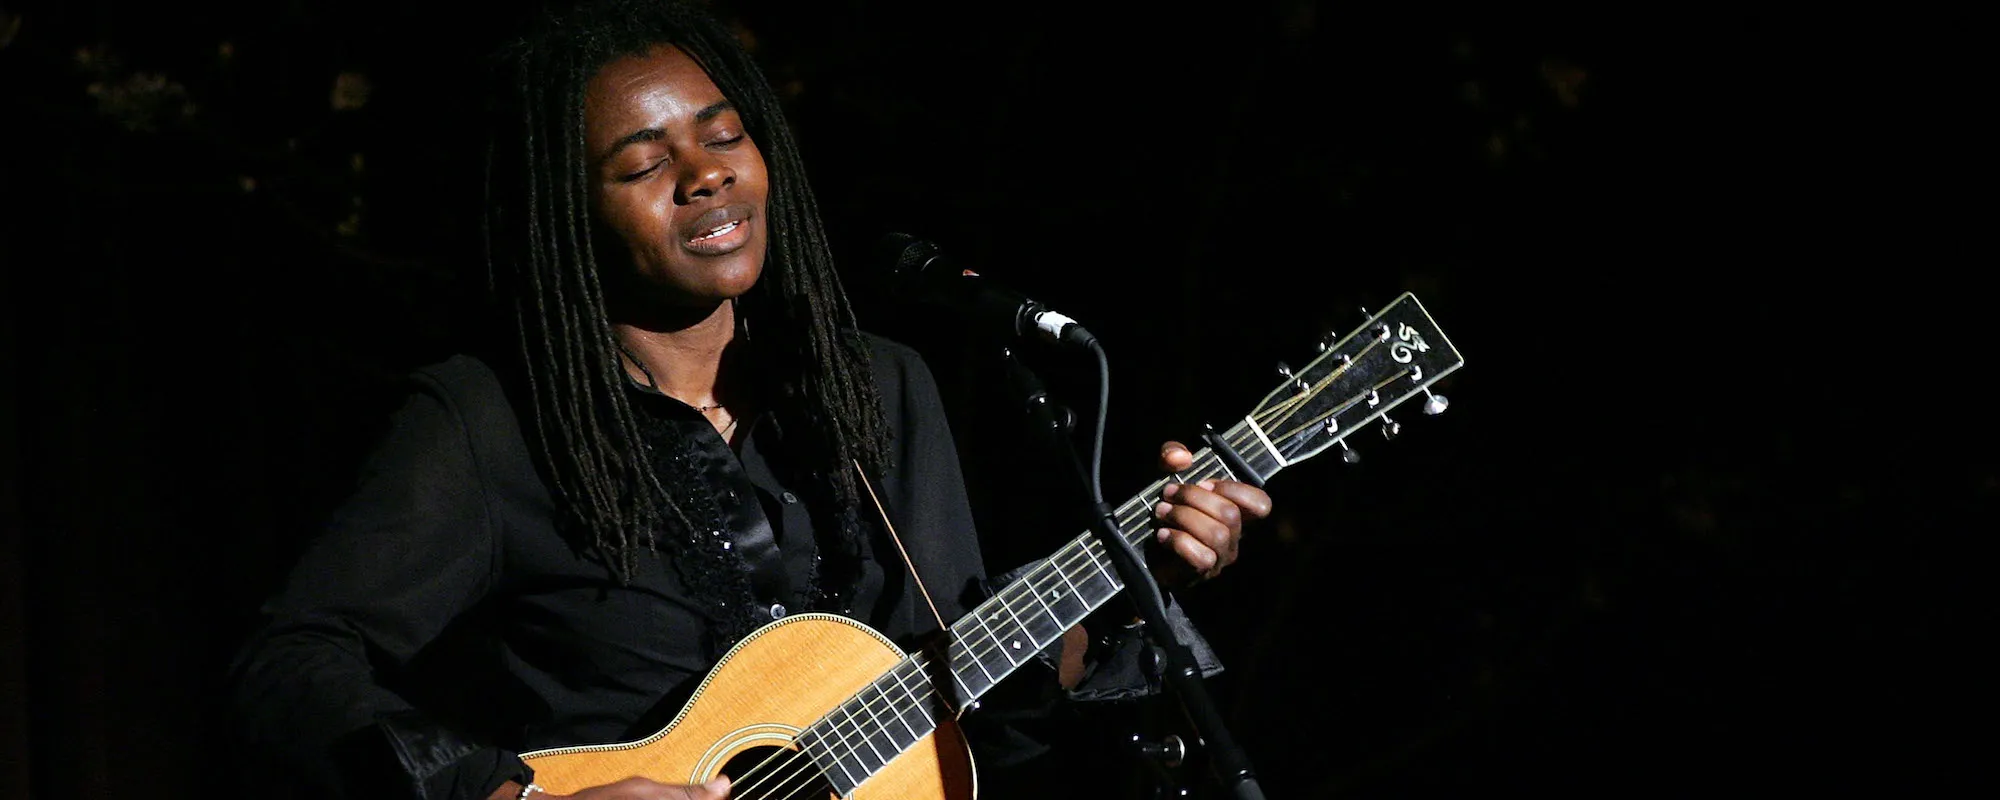 Tracy Chapman Becomes First Black Woman to Win CMA Award for Song of the Year